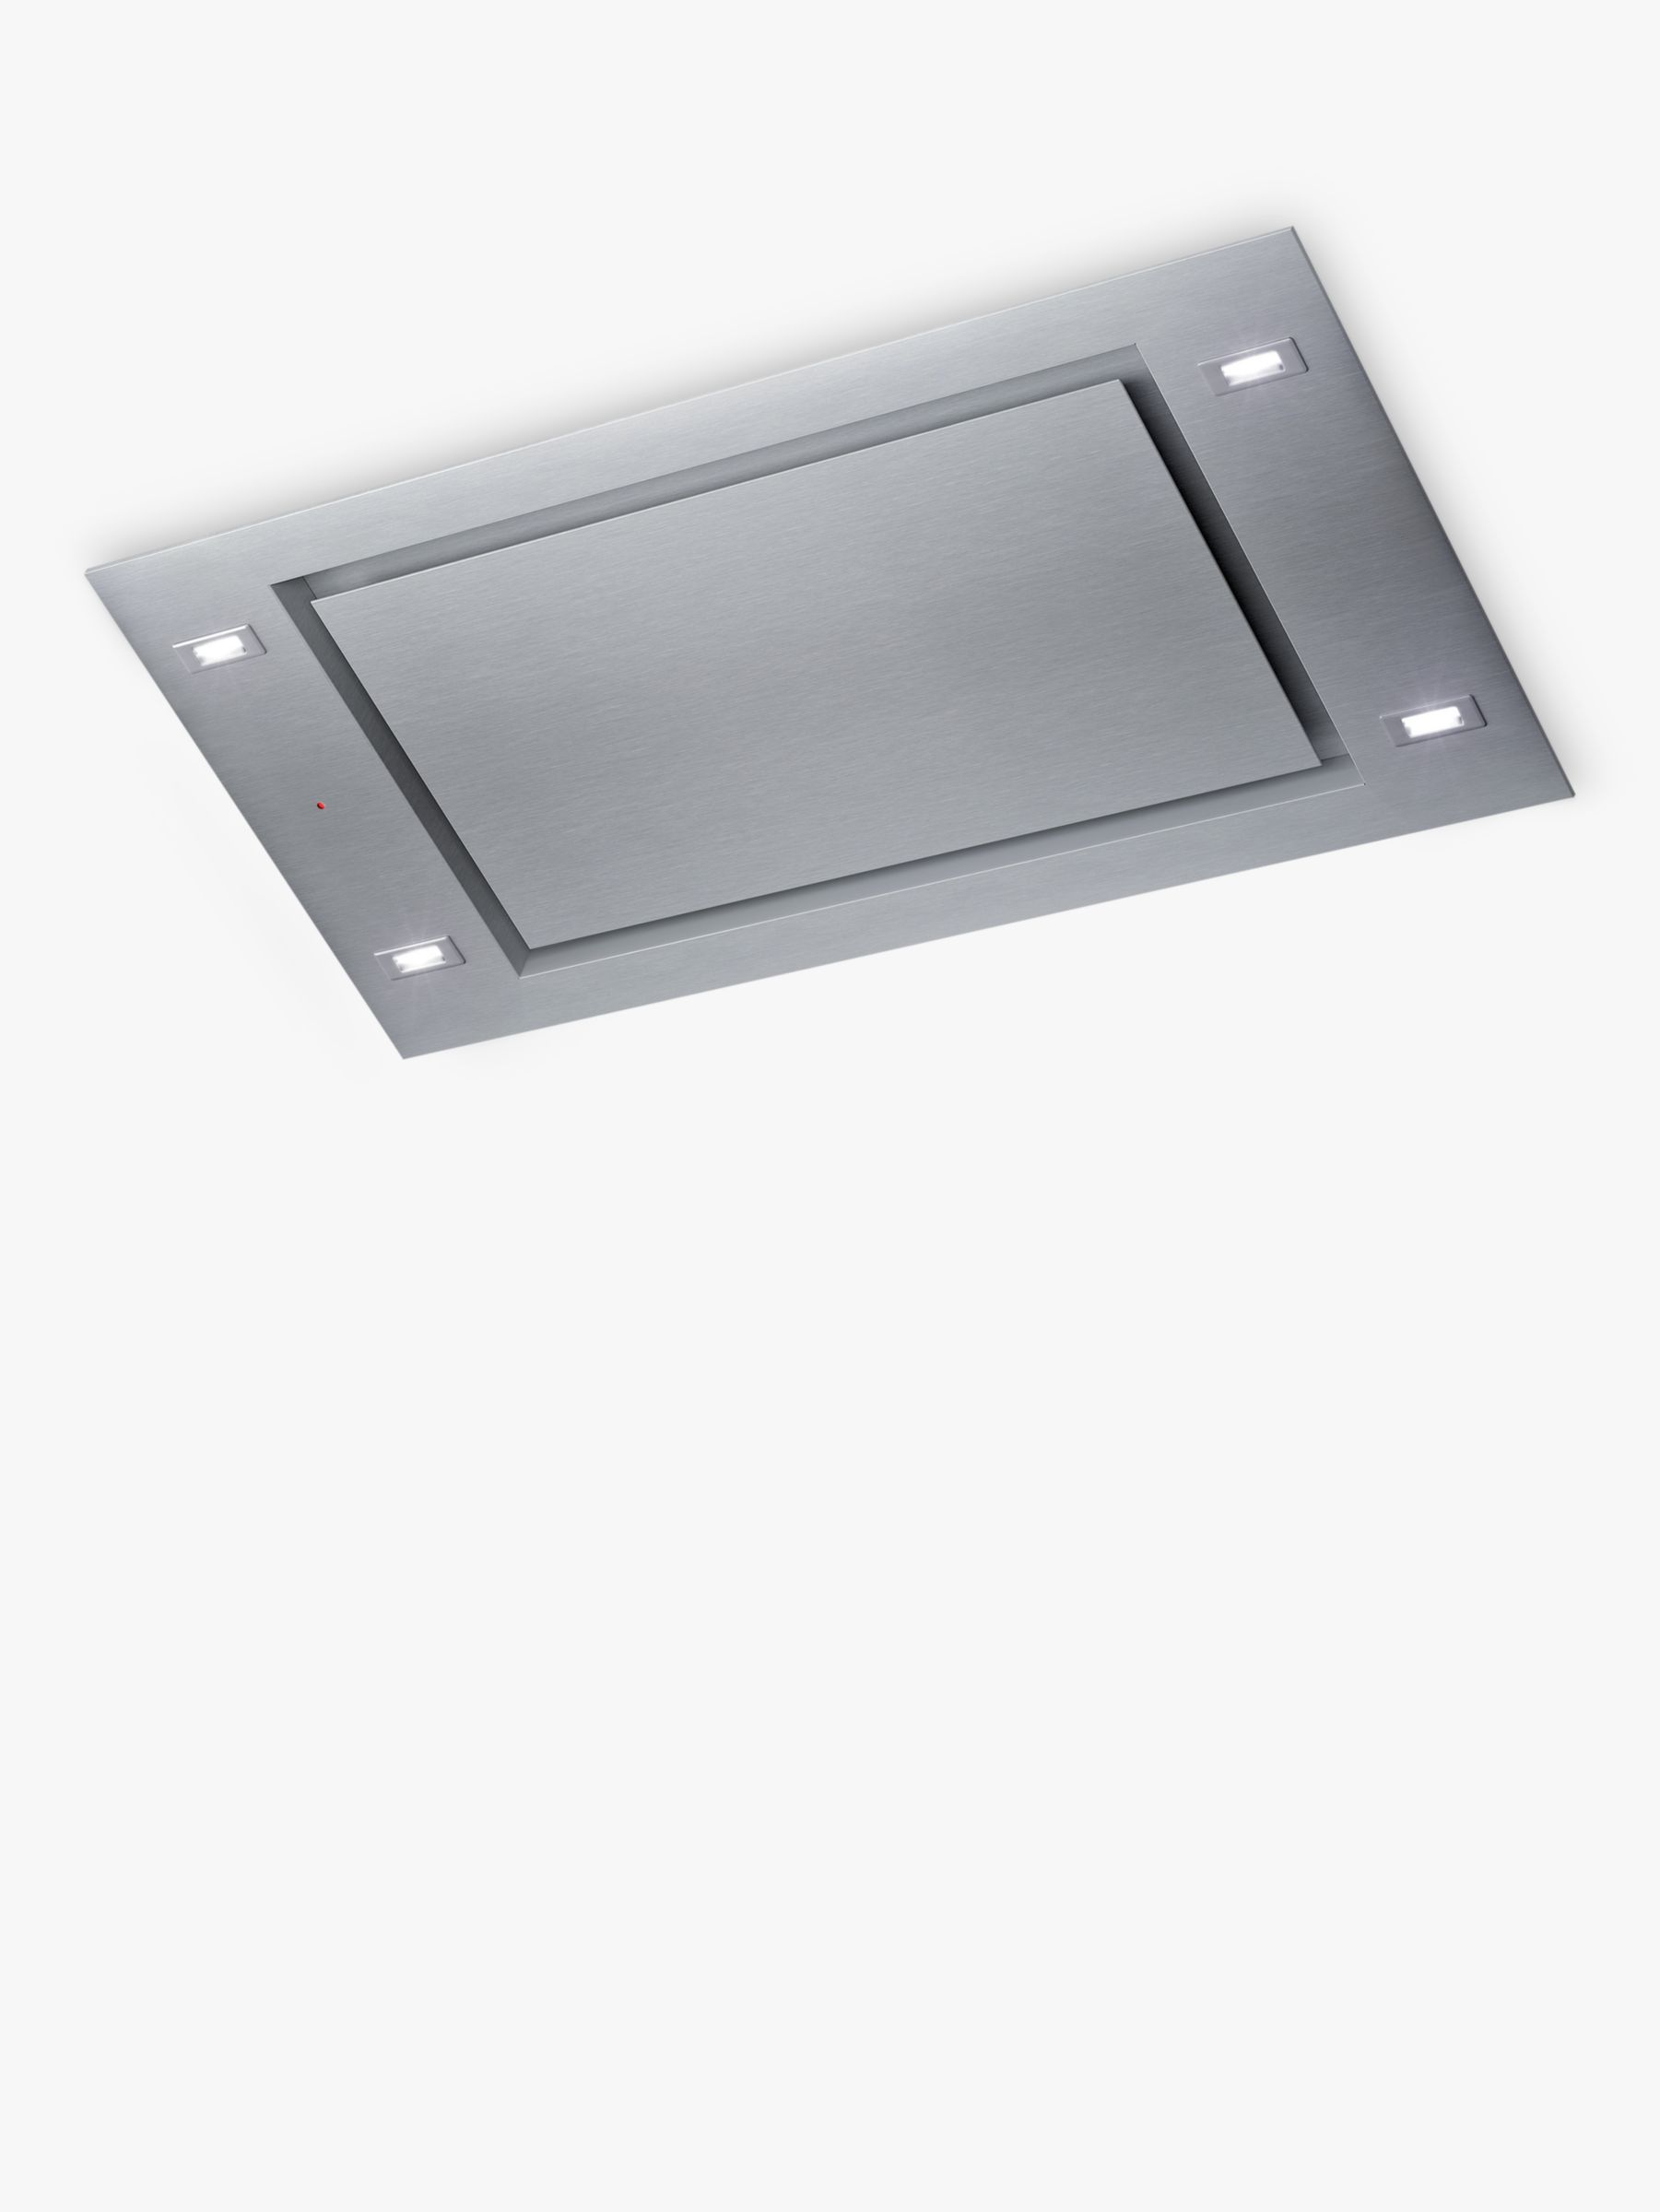 KitchenAid KEICD 10010 Integrated Cooker Hood, Stainless Steel